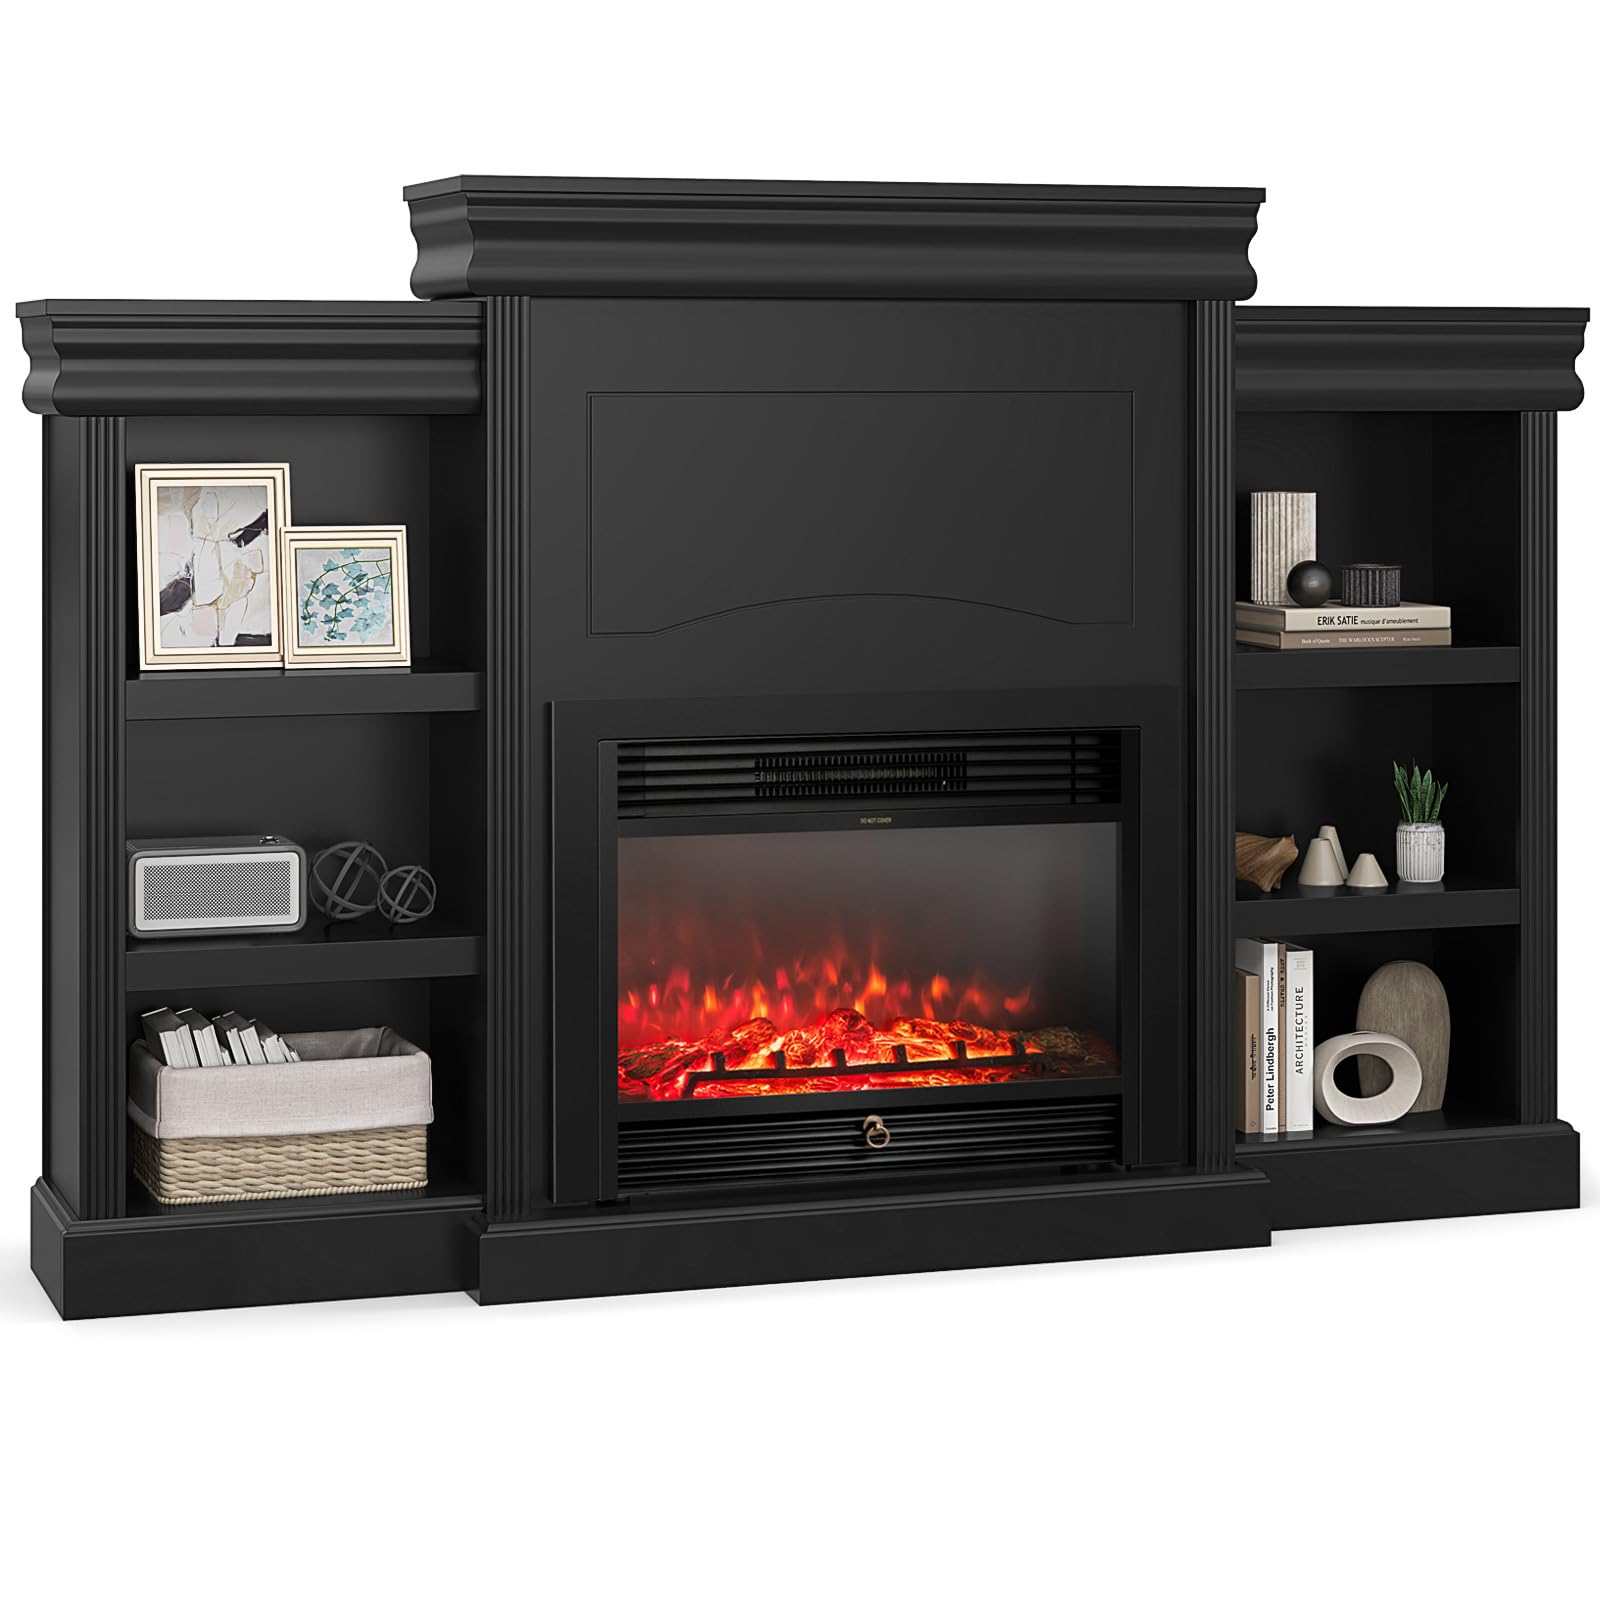 Giantex Electric Fireplace TV Stand - 1500W Electric Fireplace Inserts with 3 Flame Colors